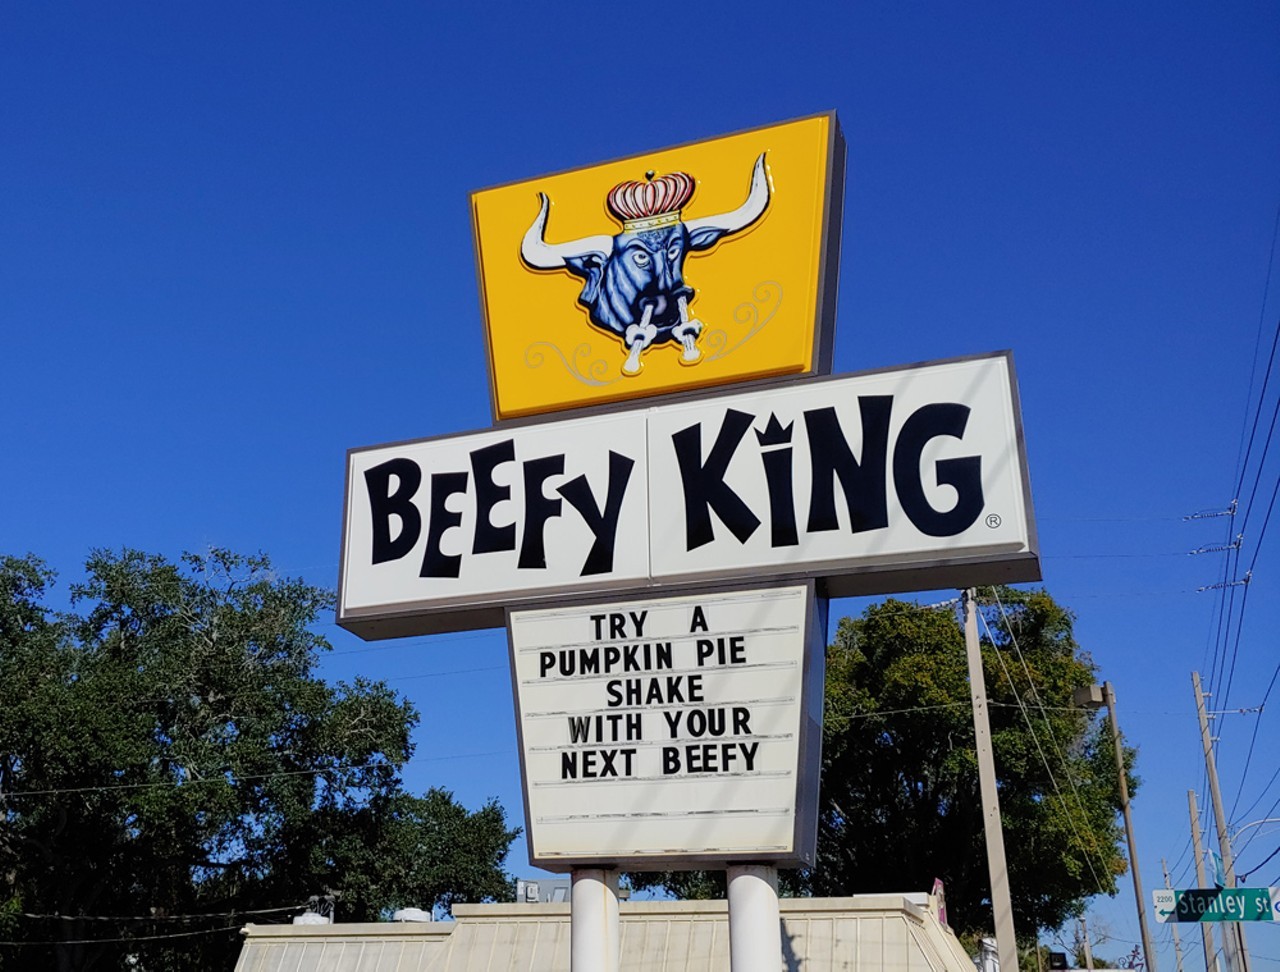 Beefy King
424 N. Bumby Ave., Orlando
This Central Florida meaty institution has been filling hungry Orlandoans' stomachs with the best roast beef (and turkey, ham or pastrami) sandwiches since 1968. Beefy King also offers milkshakes and their own spin on the classic tater tot, Beefy Spuds. You wouldn't want to deny this City Beautiful classic to the out-of-towners.